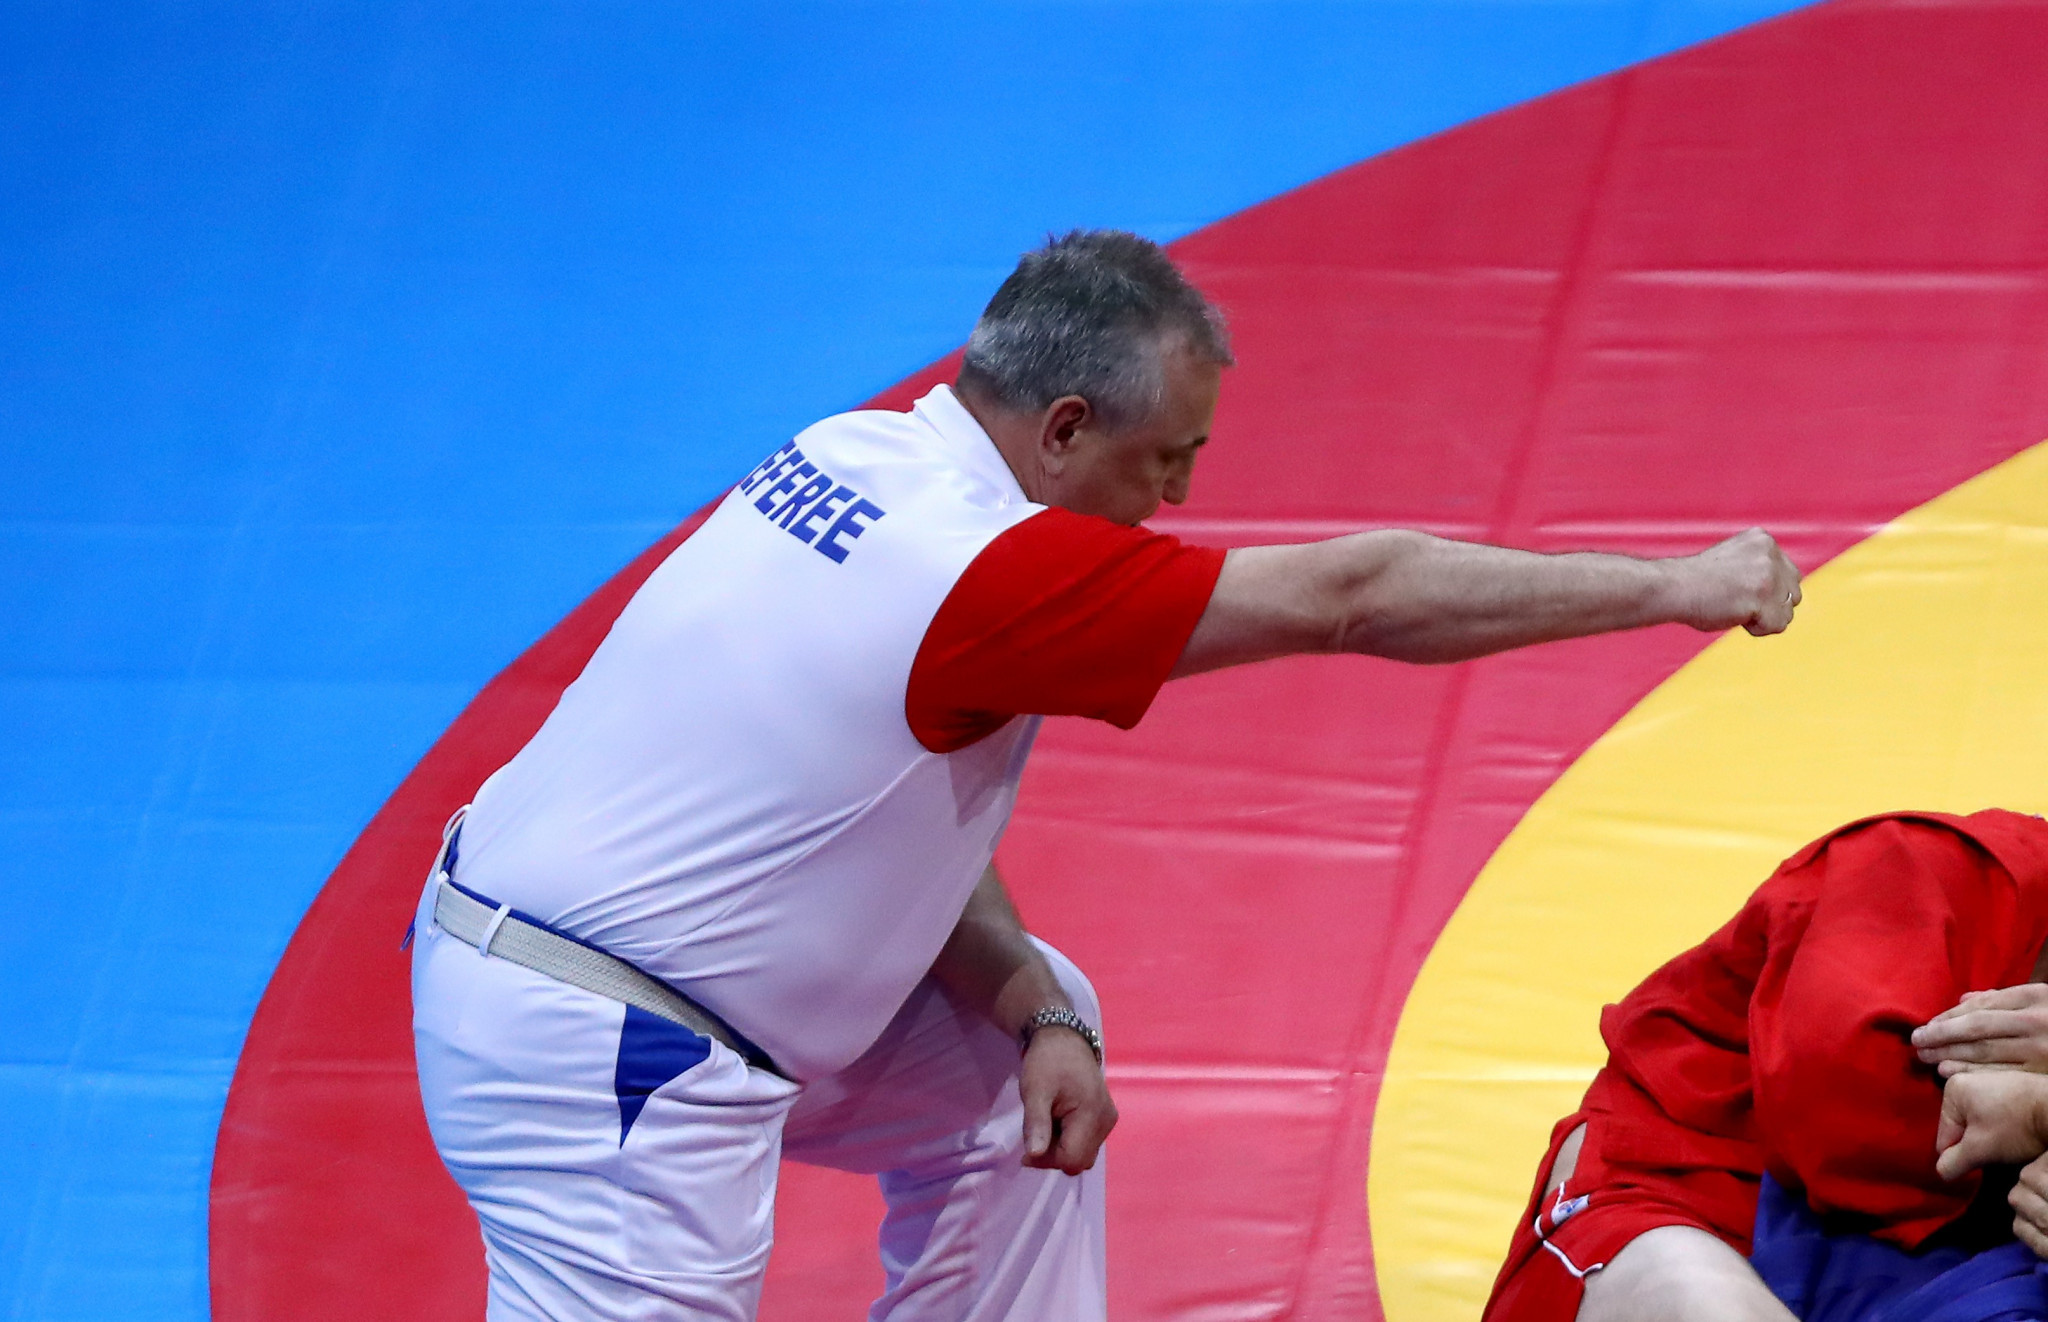 An international seminar for sambo referees will be held in Morocco later this month ©Getty Images